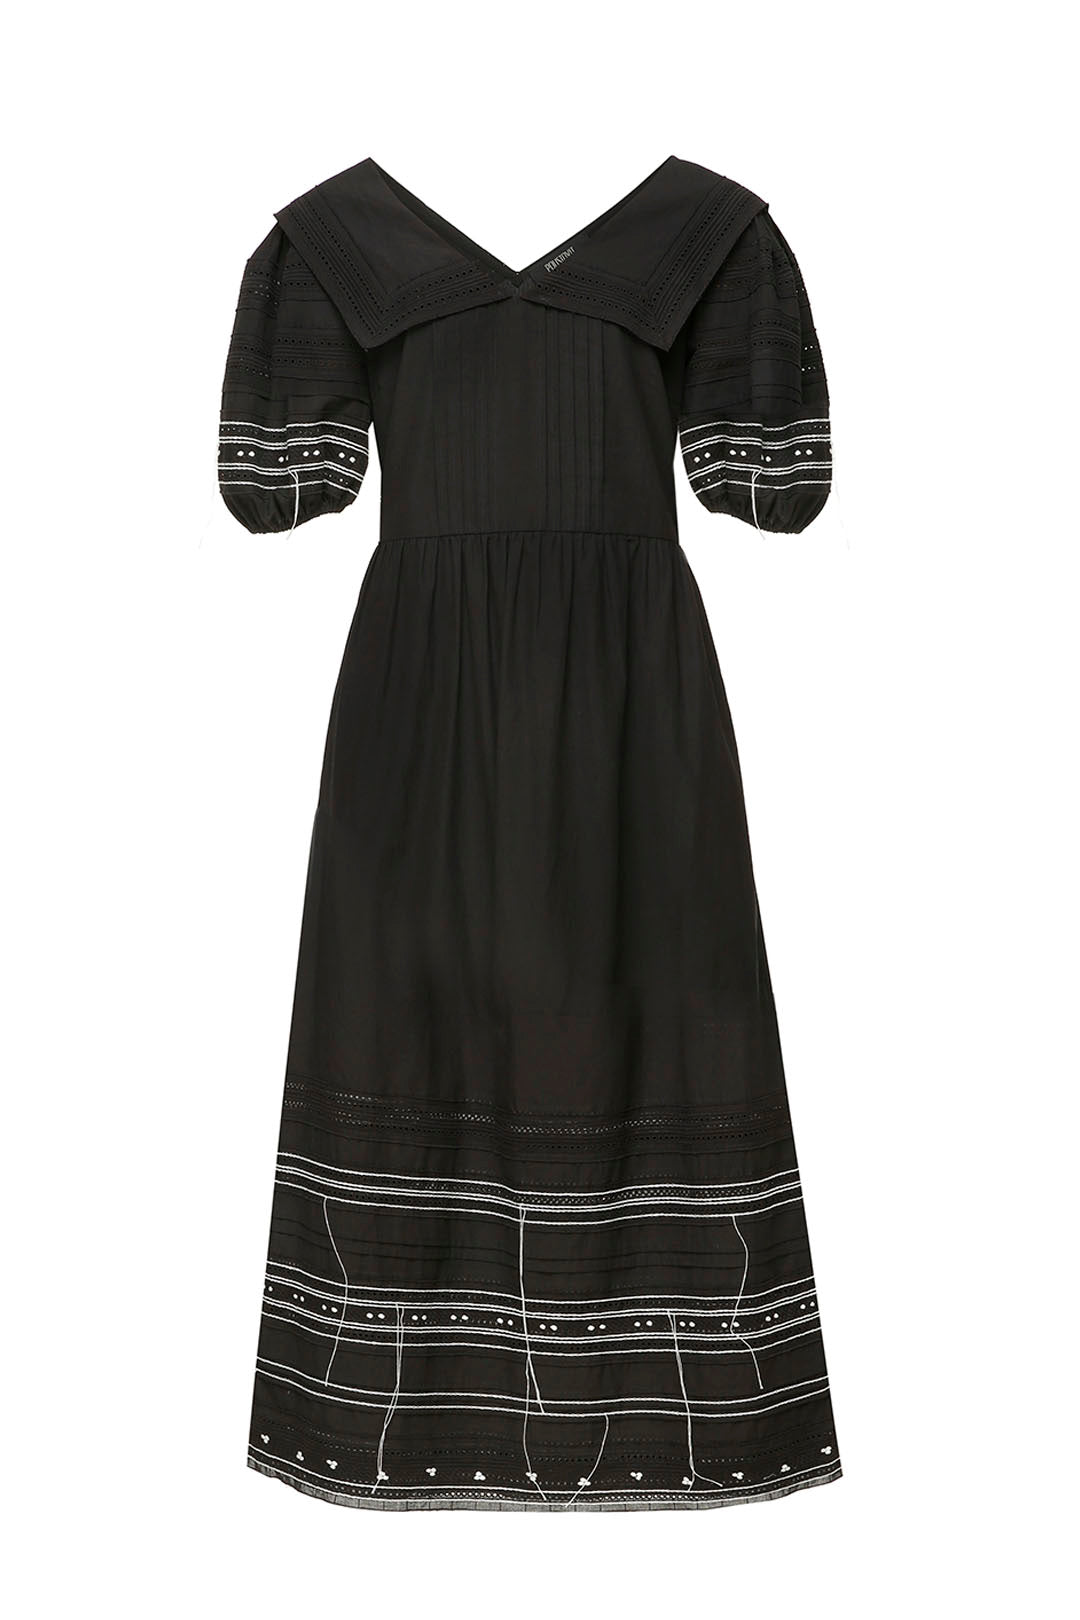 Black cotton dress with hand embroidery